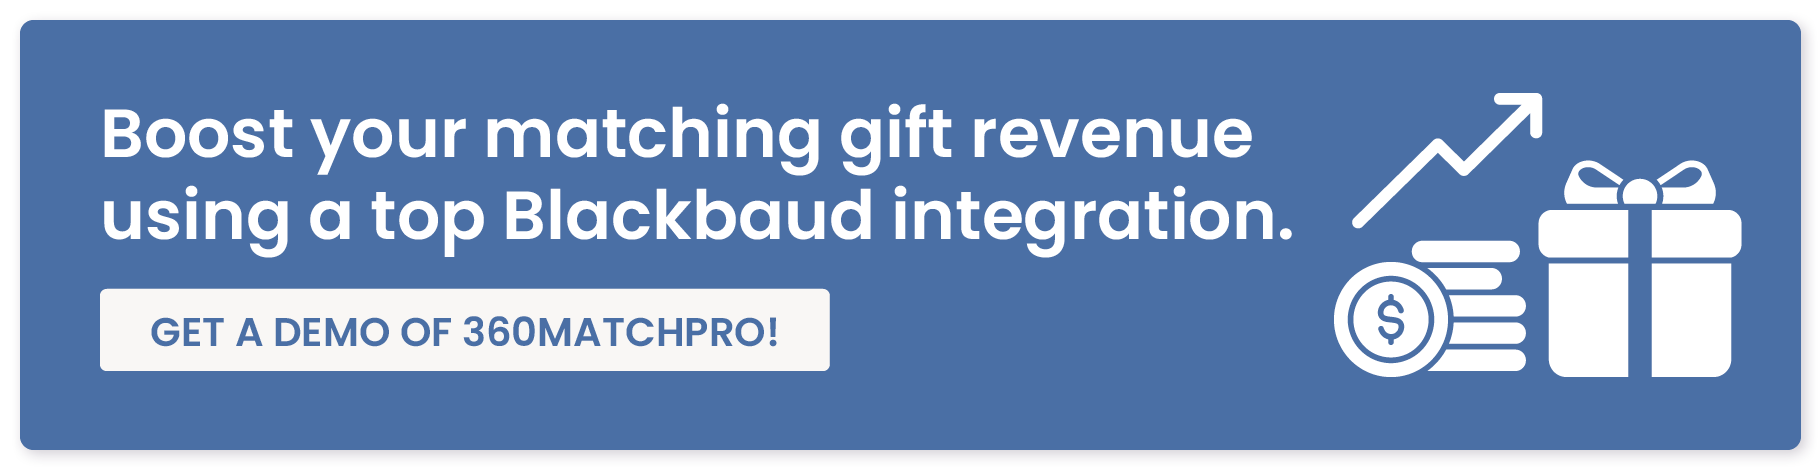 Get a demo of 360MatchPro, a top Blackbaud integration, to boost your matching gift revenue.